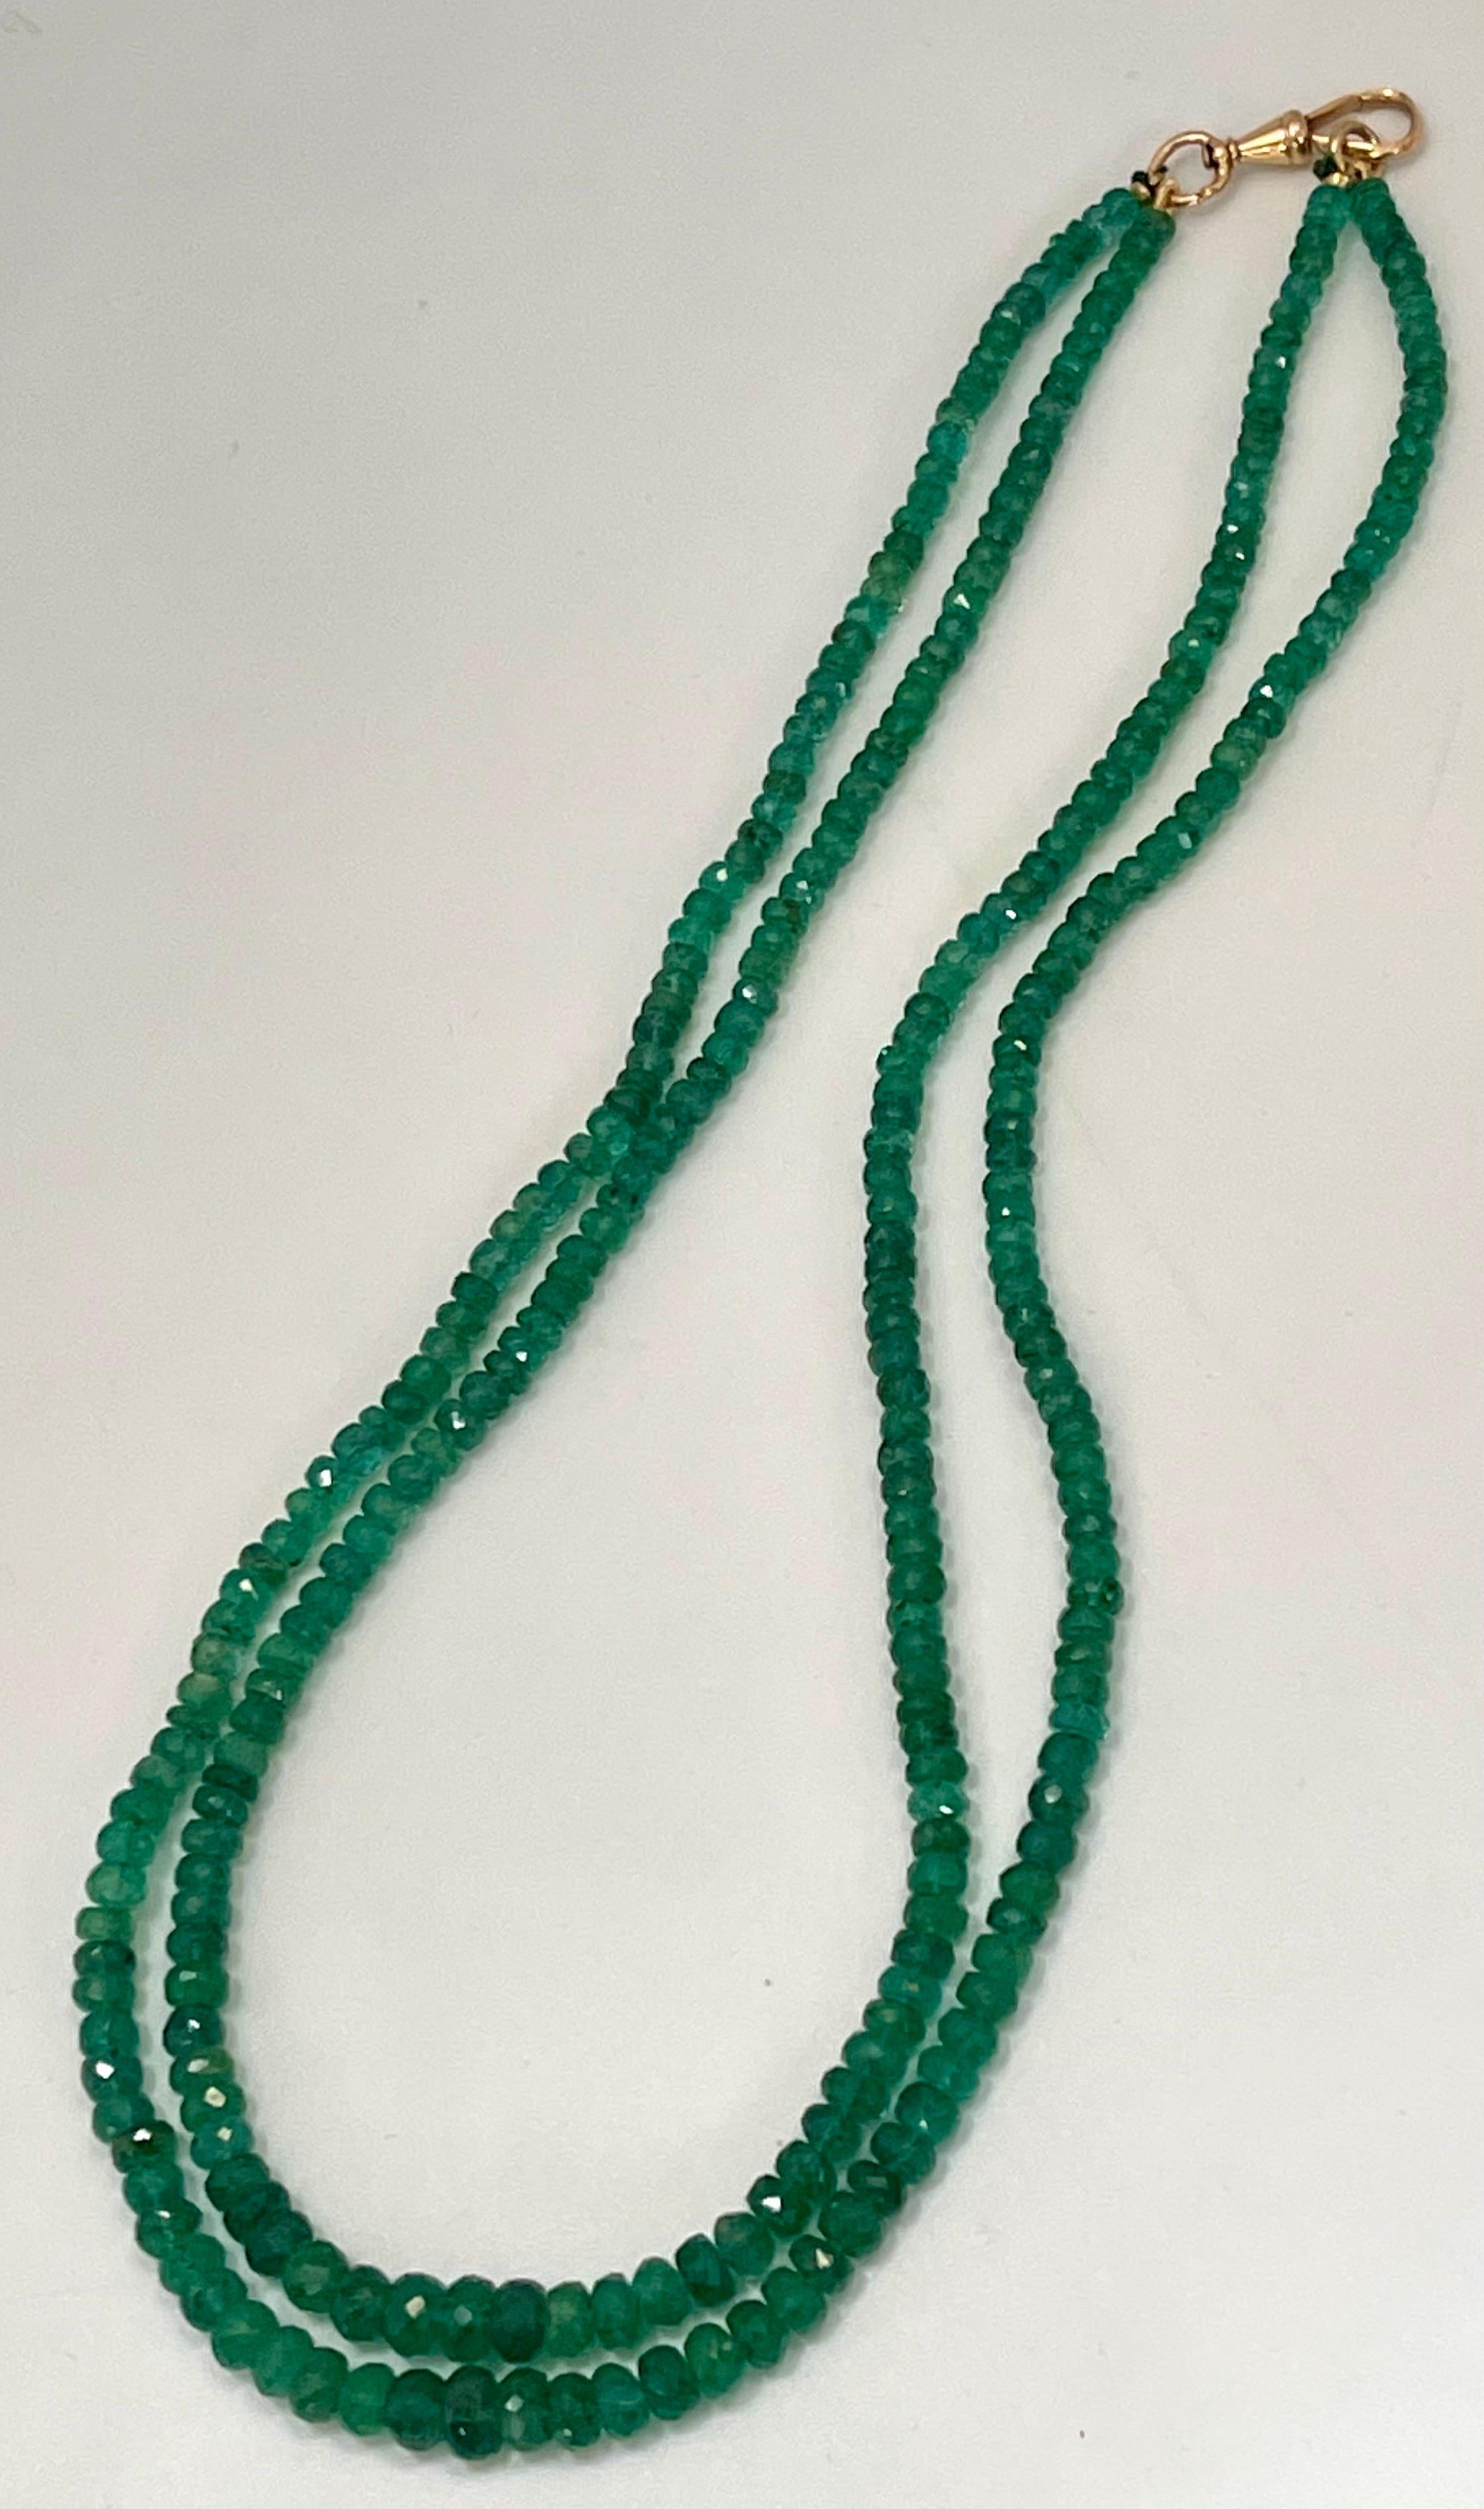 145 Ct Fine Natural Emerald Beads 2 Line Necklace with 14 Kt Yellow Gold Clasp For Sale 3